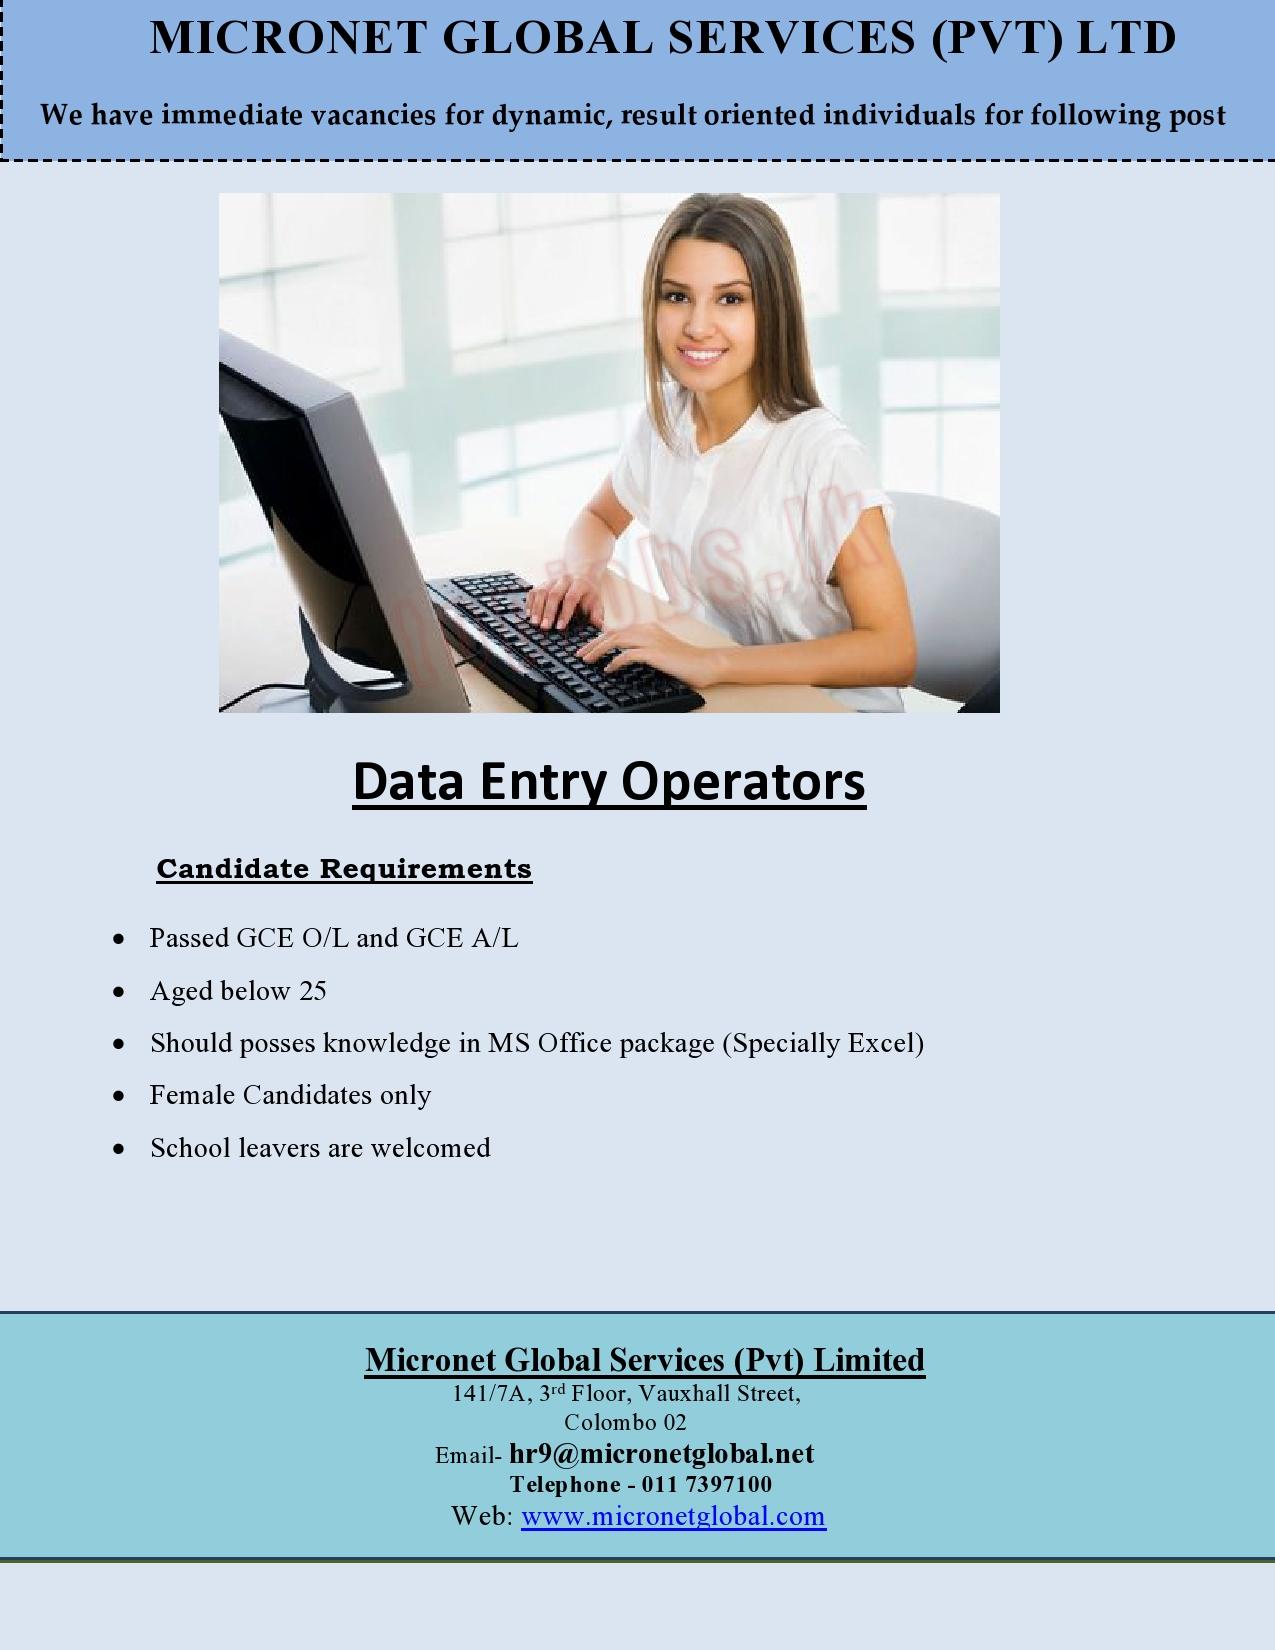 Data Entry Vacancies 2022 in Micronet Global Services (Pvt) Ltd